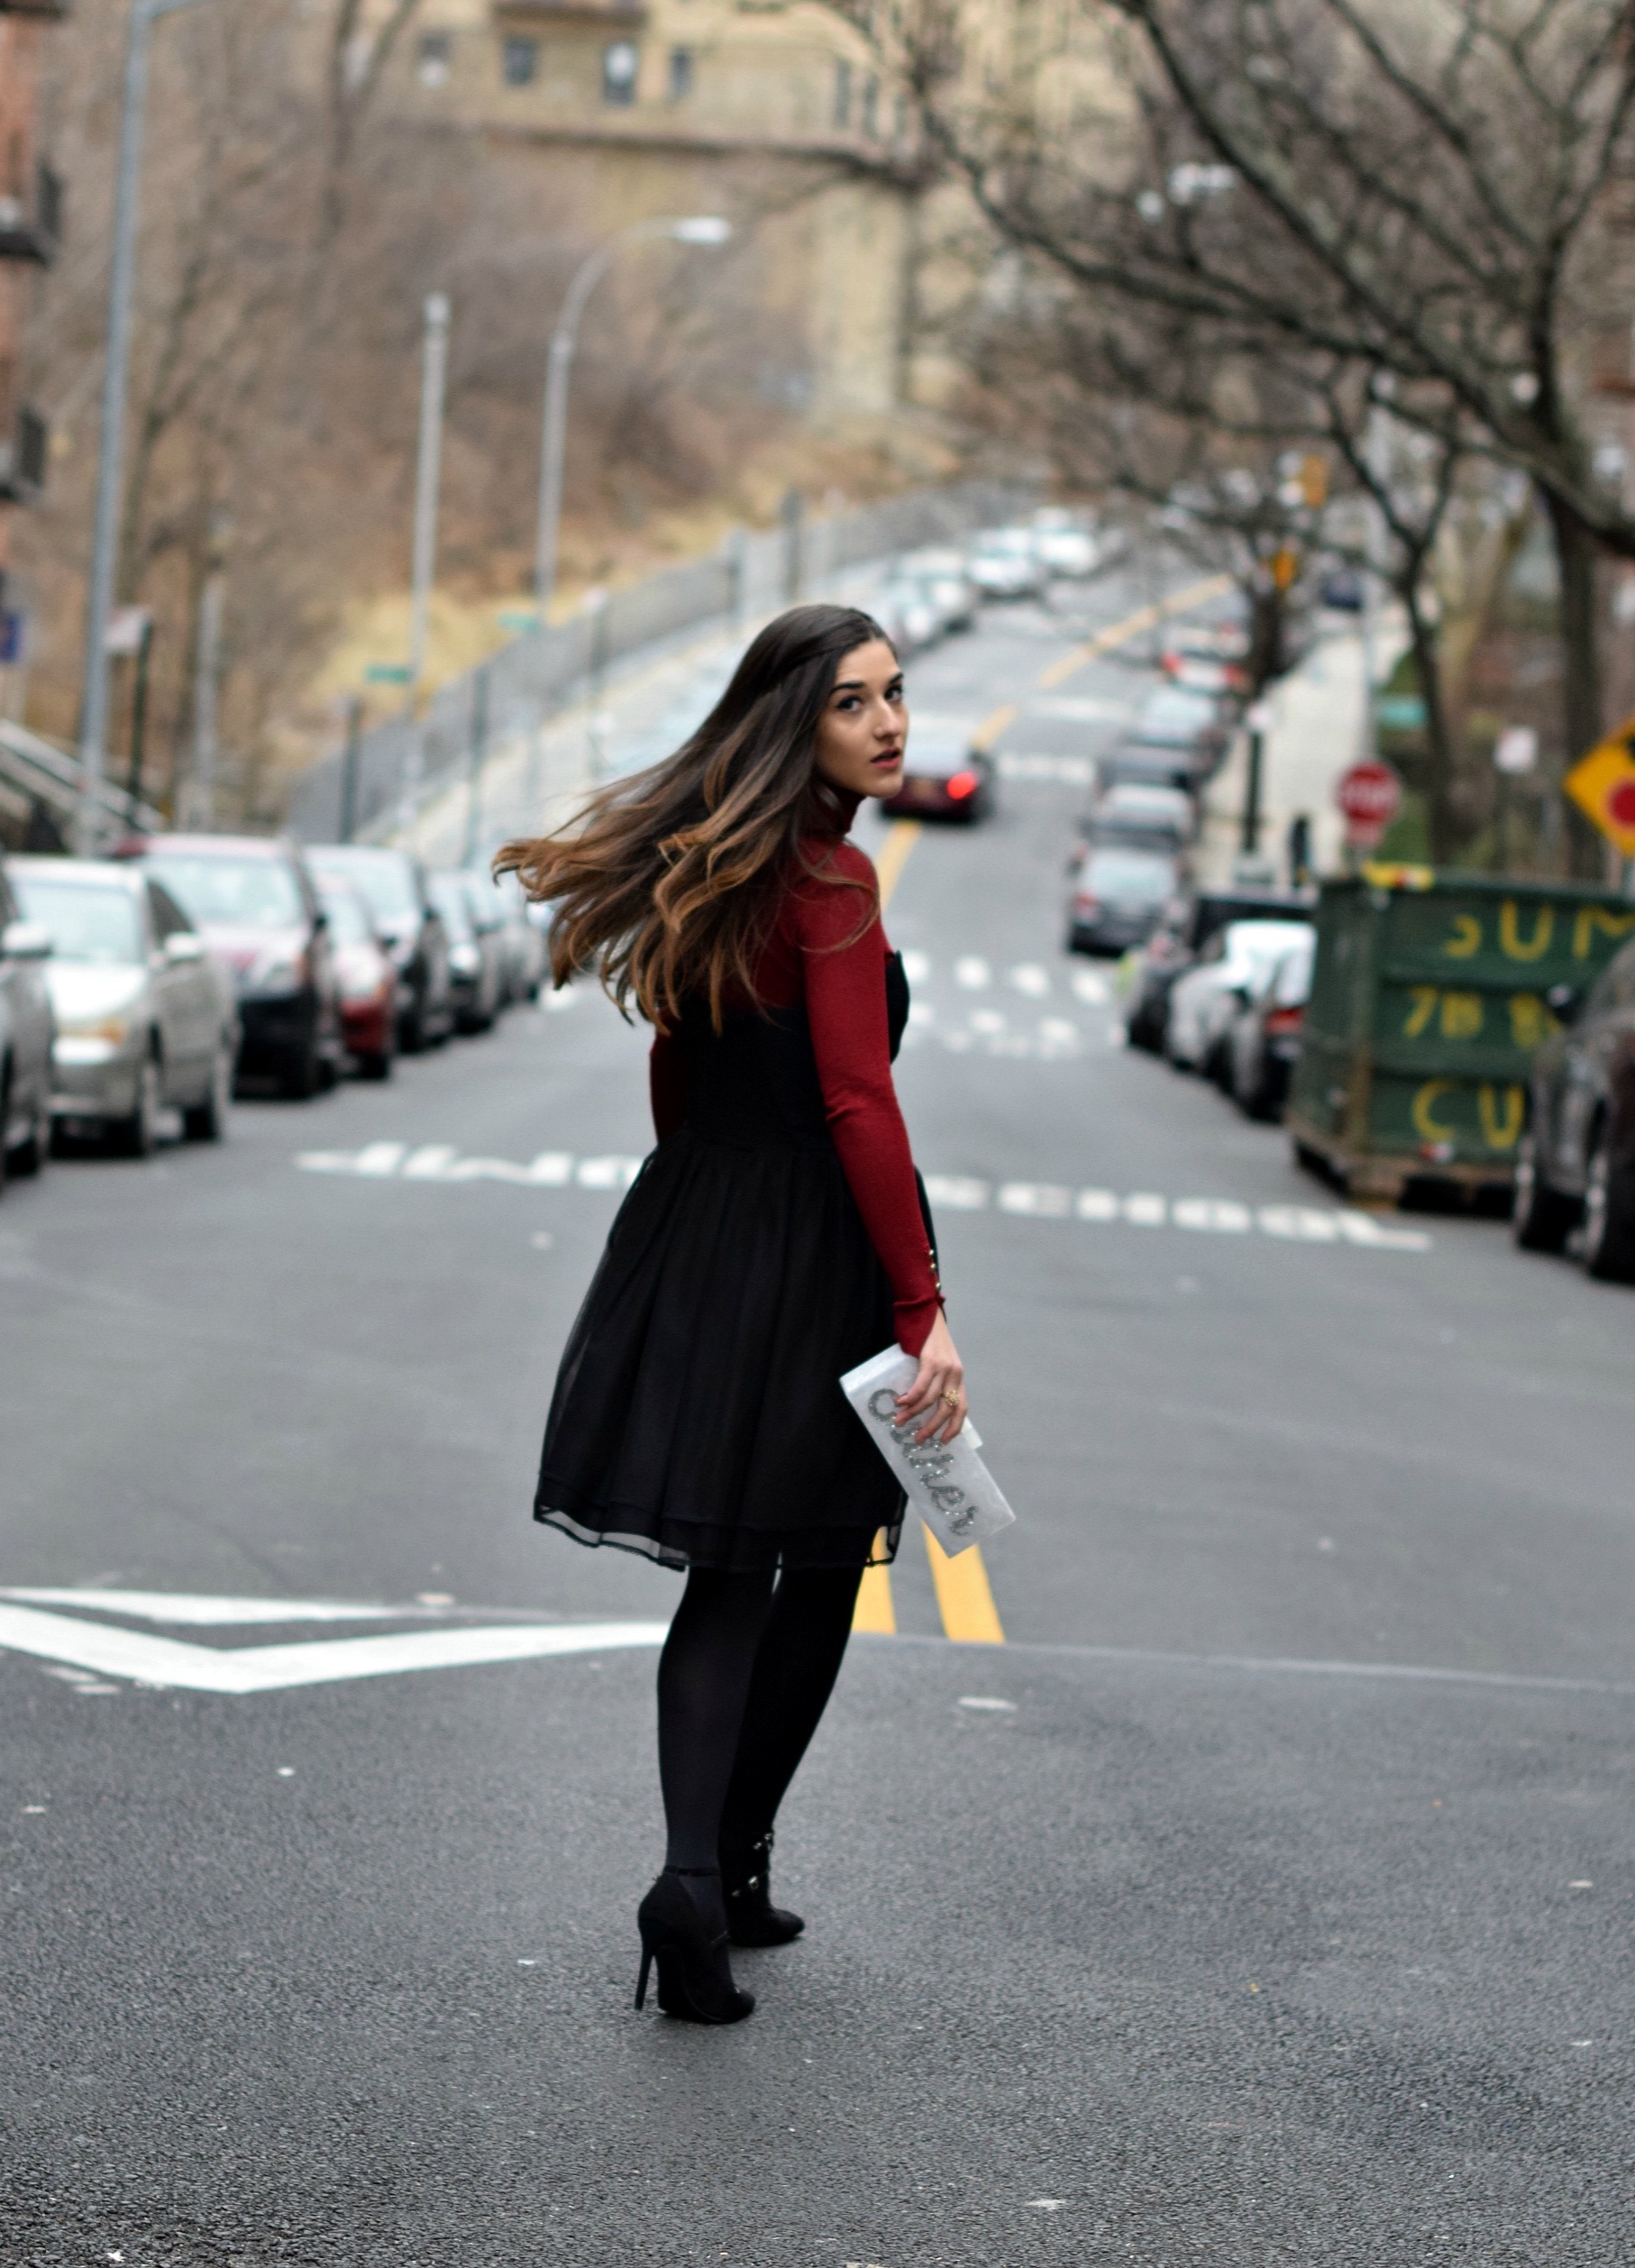 Red Turtleneck Under Strapless Dress Louboutins & Love Fashion Blog Esther Santer NYC Street Style Blogger Black Tights Name Monogrammed Clutch Hair Beautiful Inspo Model Photoshoot Shoes Heels Zara Outfit OOTD Shopping Girl Women New York City Winter.jpg